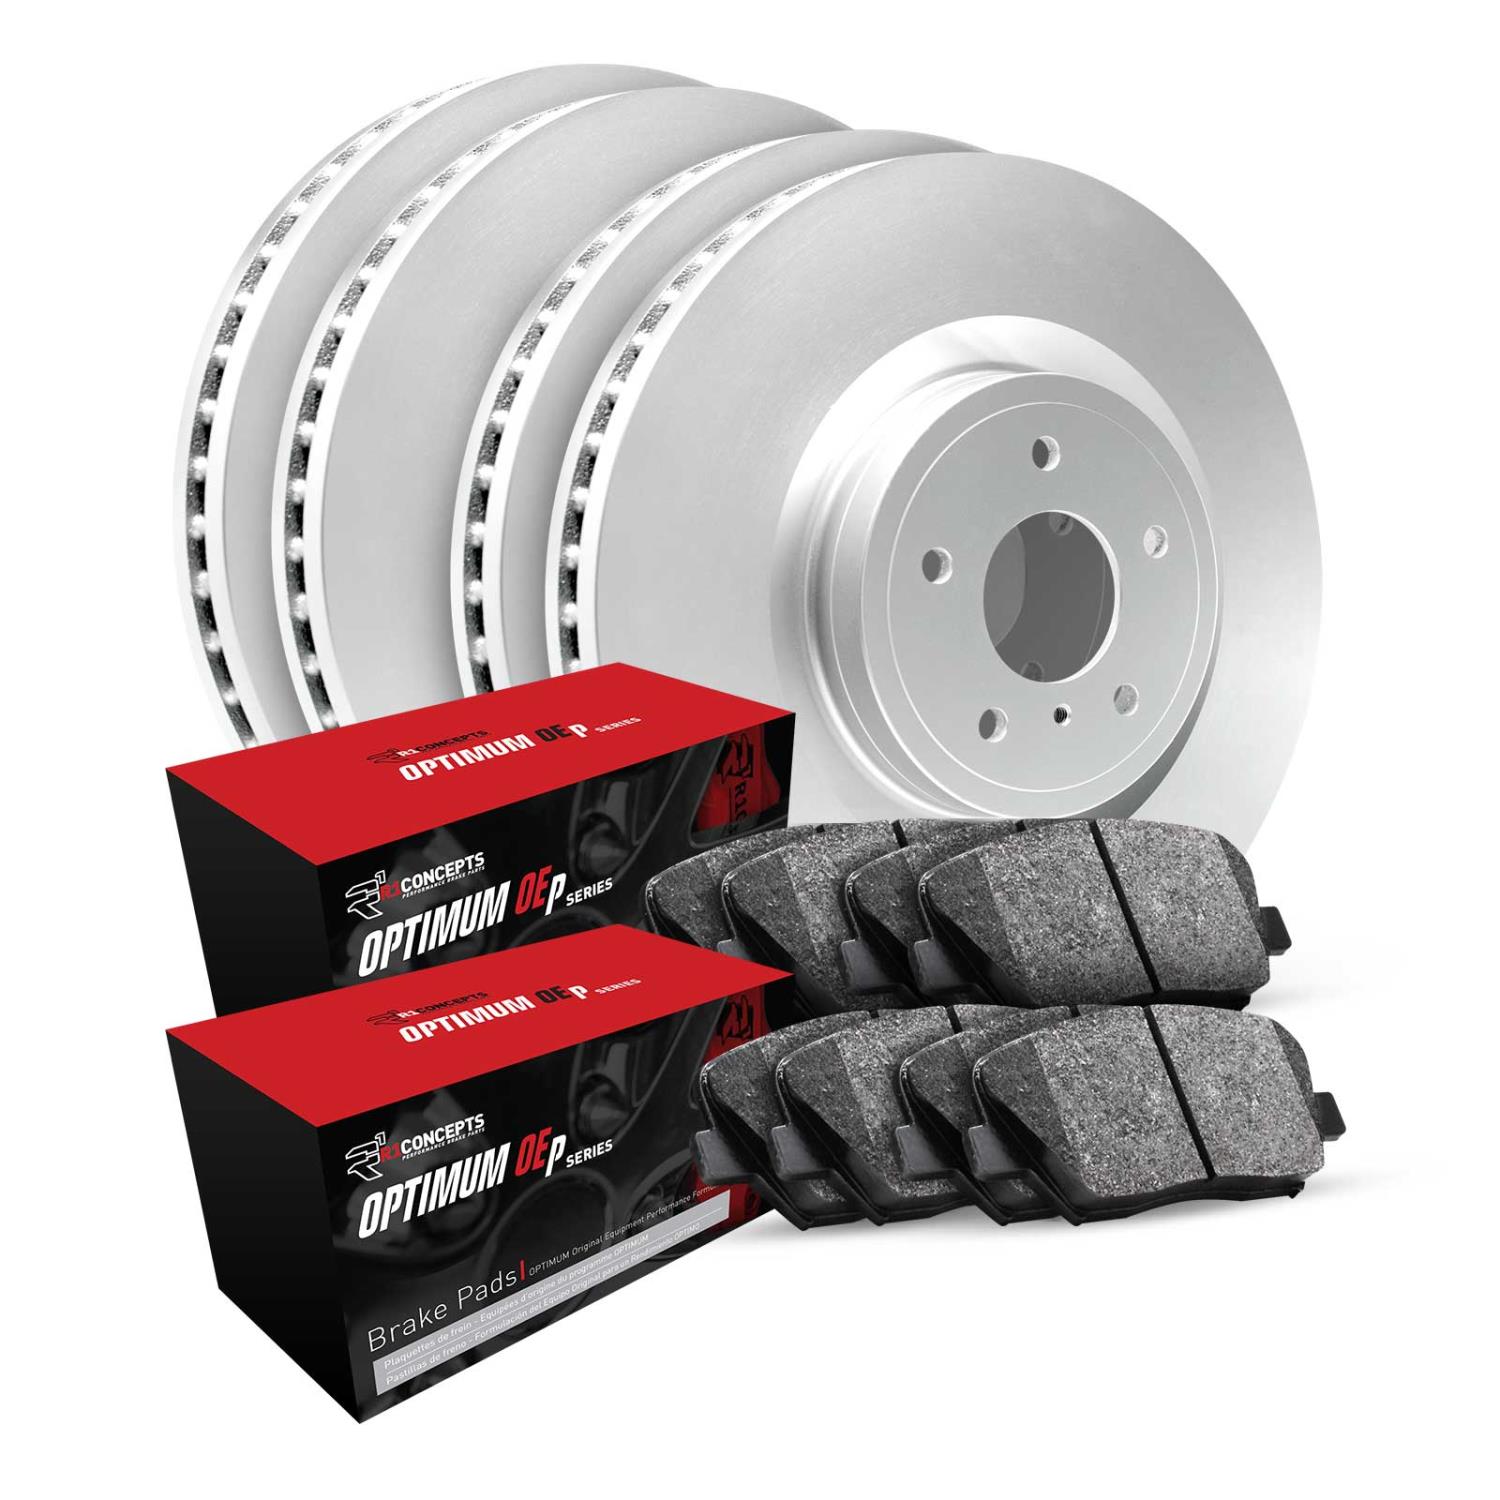 GEO-Carbon Brake Rotor & Drum Set w/Optimum OE Pads & Shoes, 2006-2012 Fits Multiple Makes/Models, Position: Front & Rear